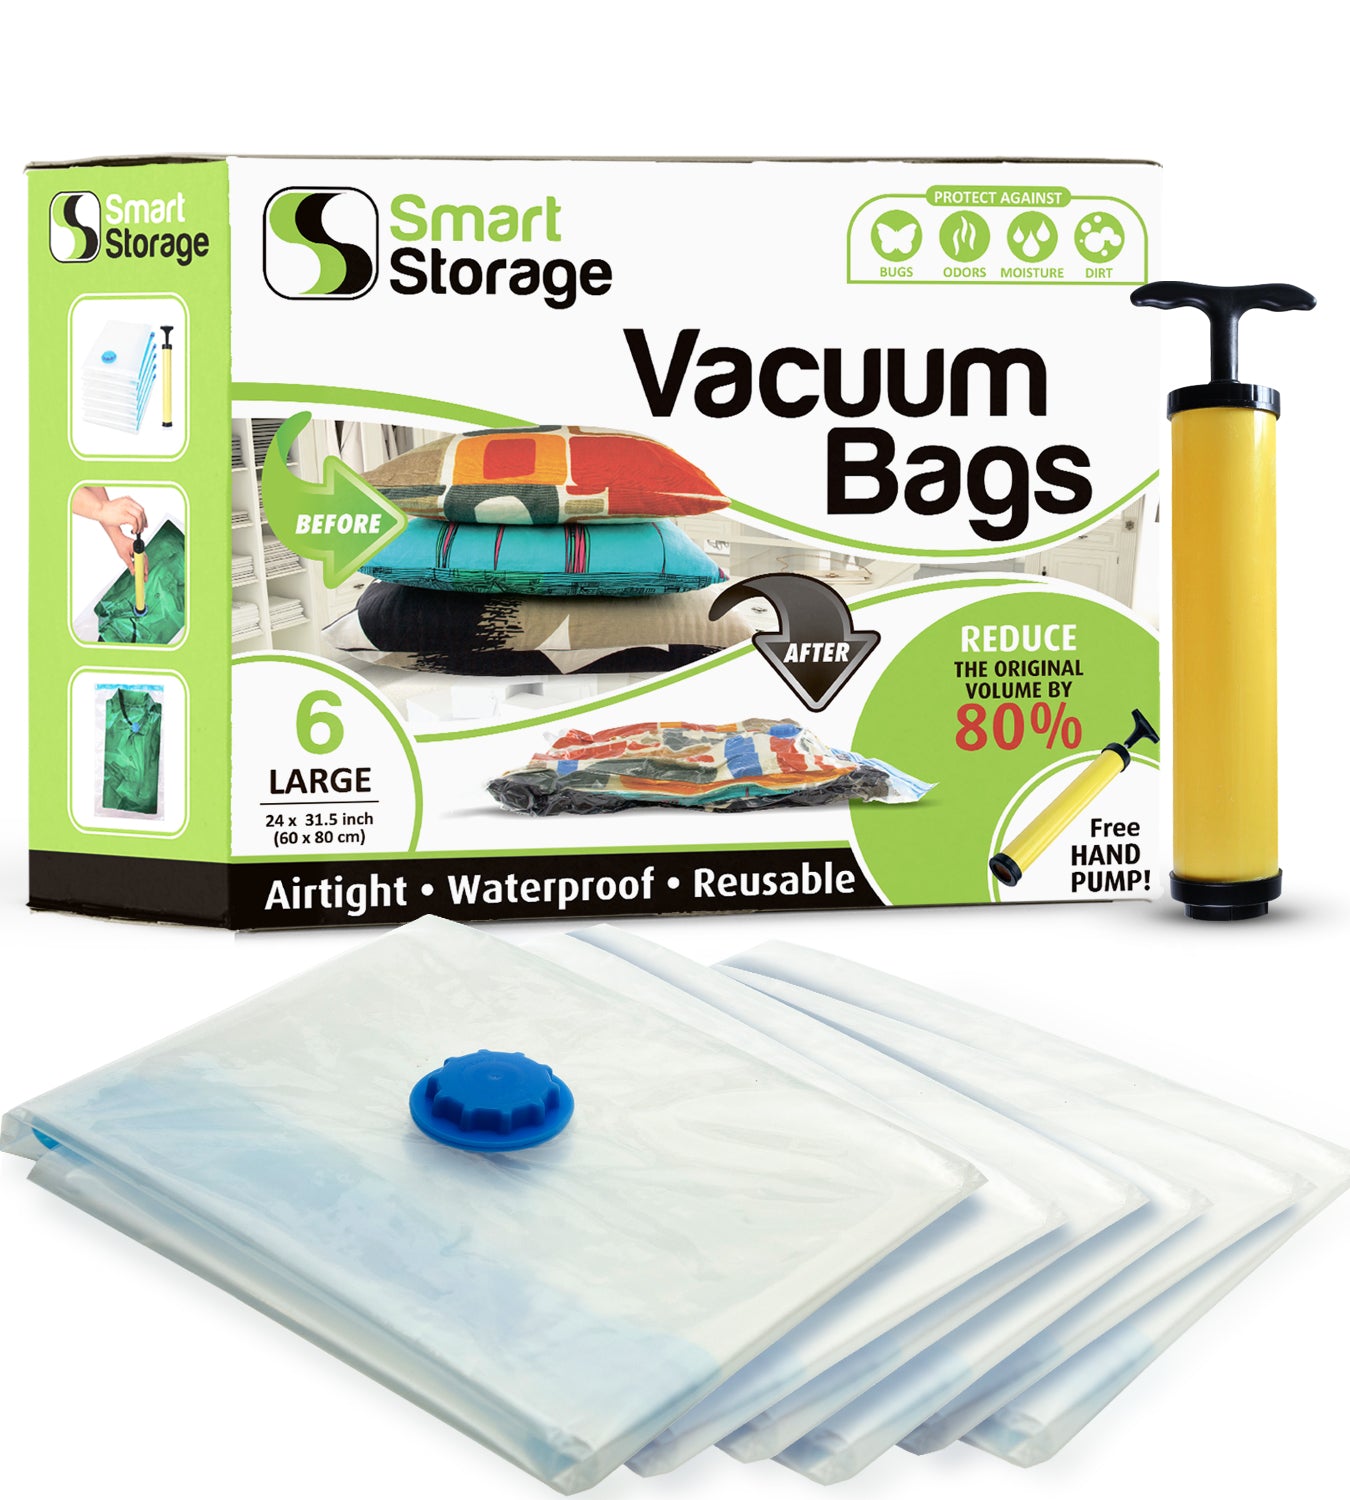 6 PC Vacuum Storage Bags | Space Saver Set | Vacuum Bags with Travel Pump | Vacuum Sealer Bags for Clothes, Bedding & Travel | Works with Any Vacuum